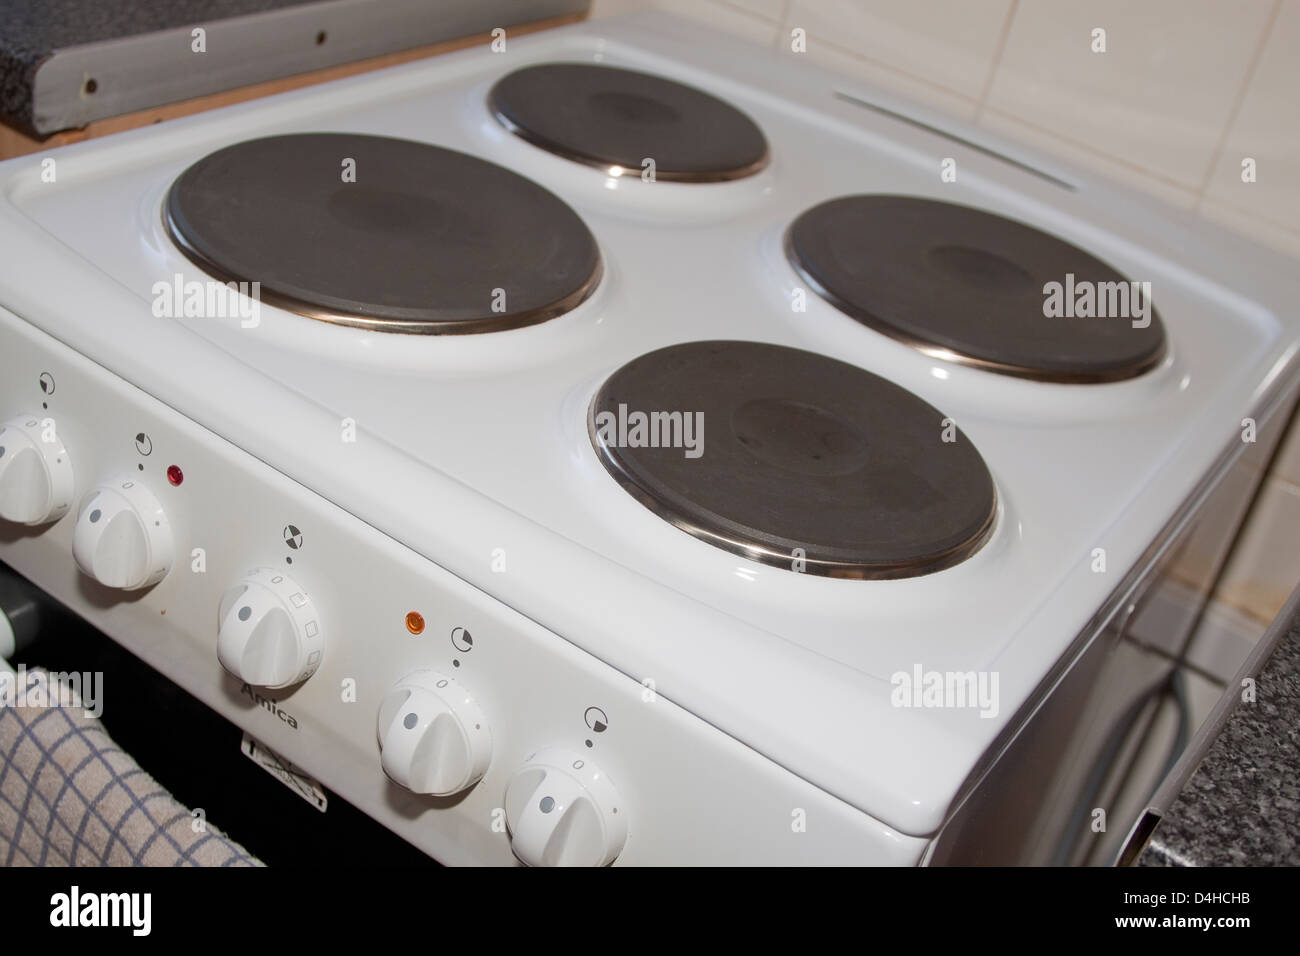 freestanding electric cooker hob Stock Photo